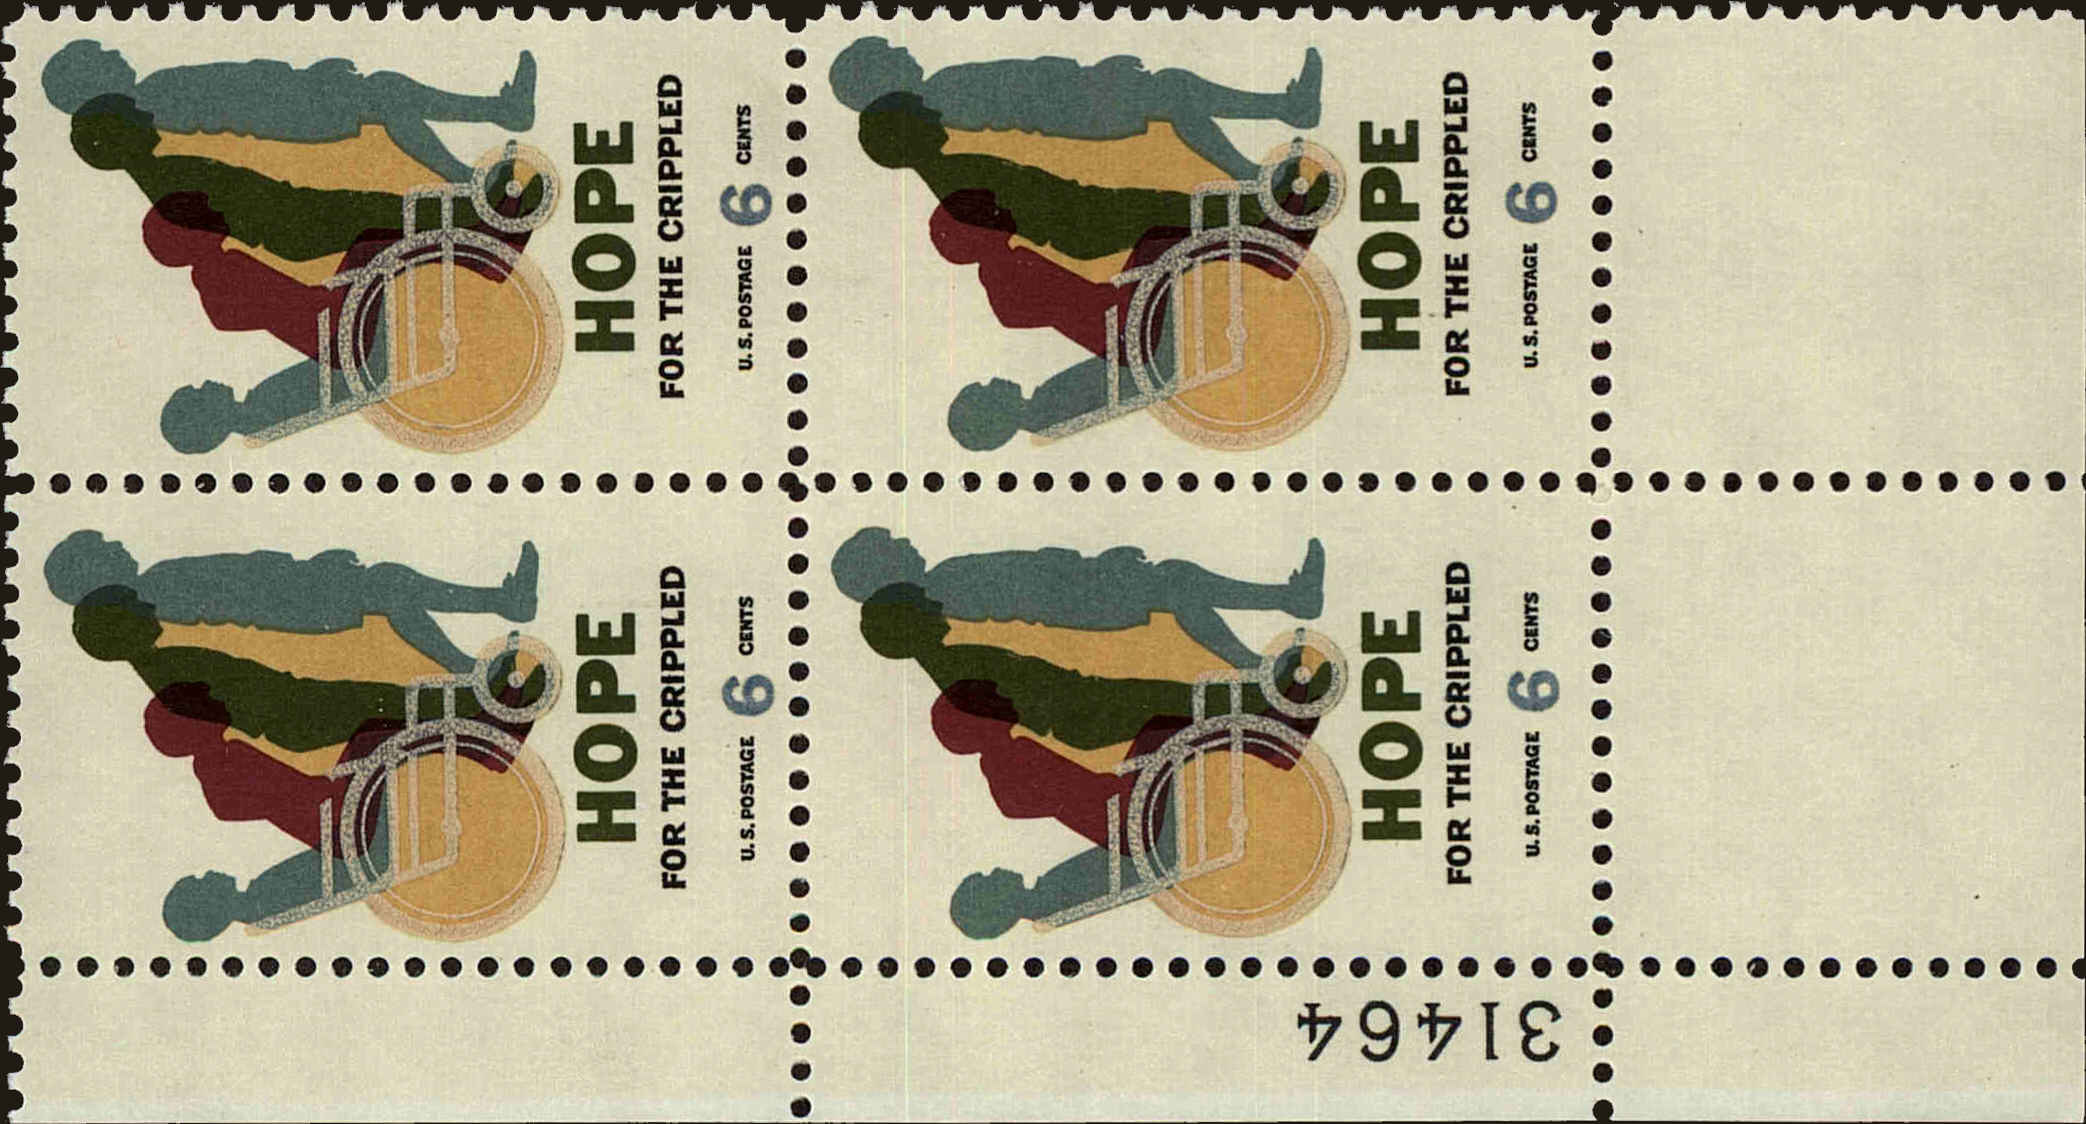 Front view of United States 1385 collectors stamp